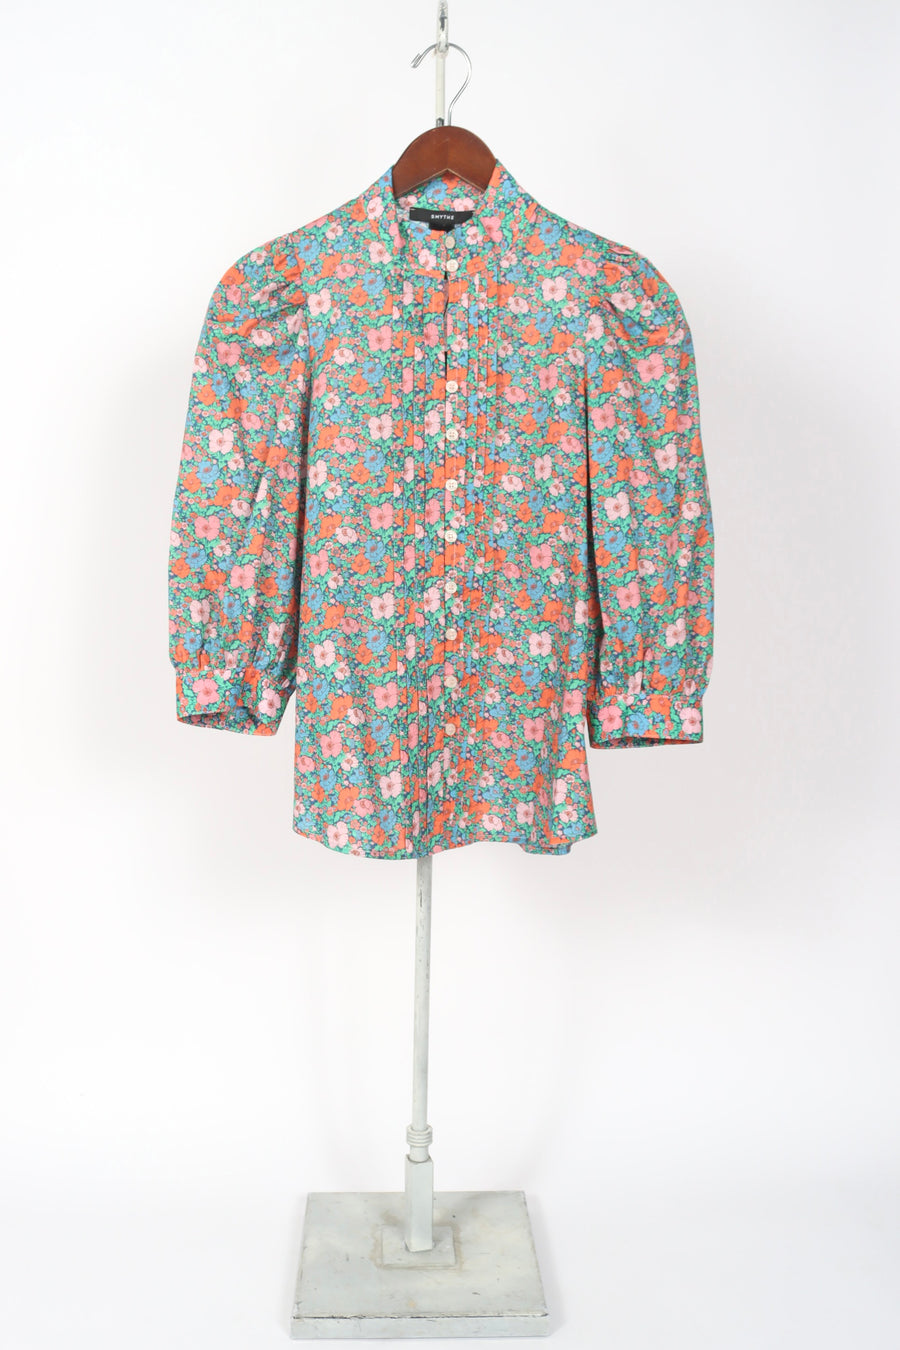 Frontier Blouse - Liberty Multi